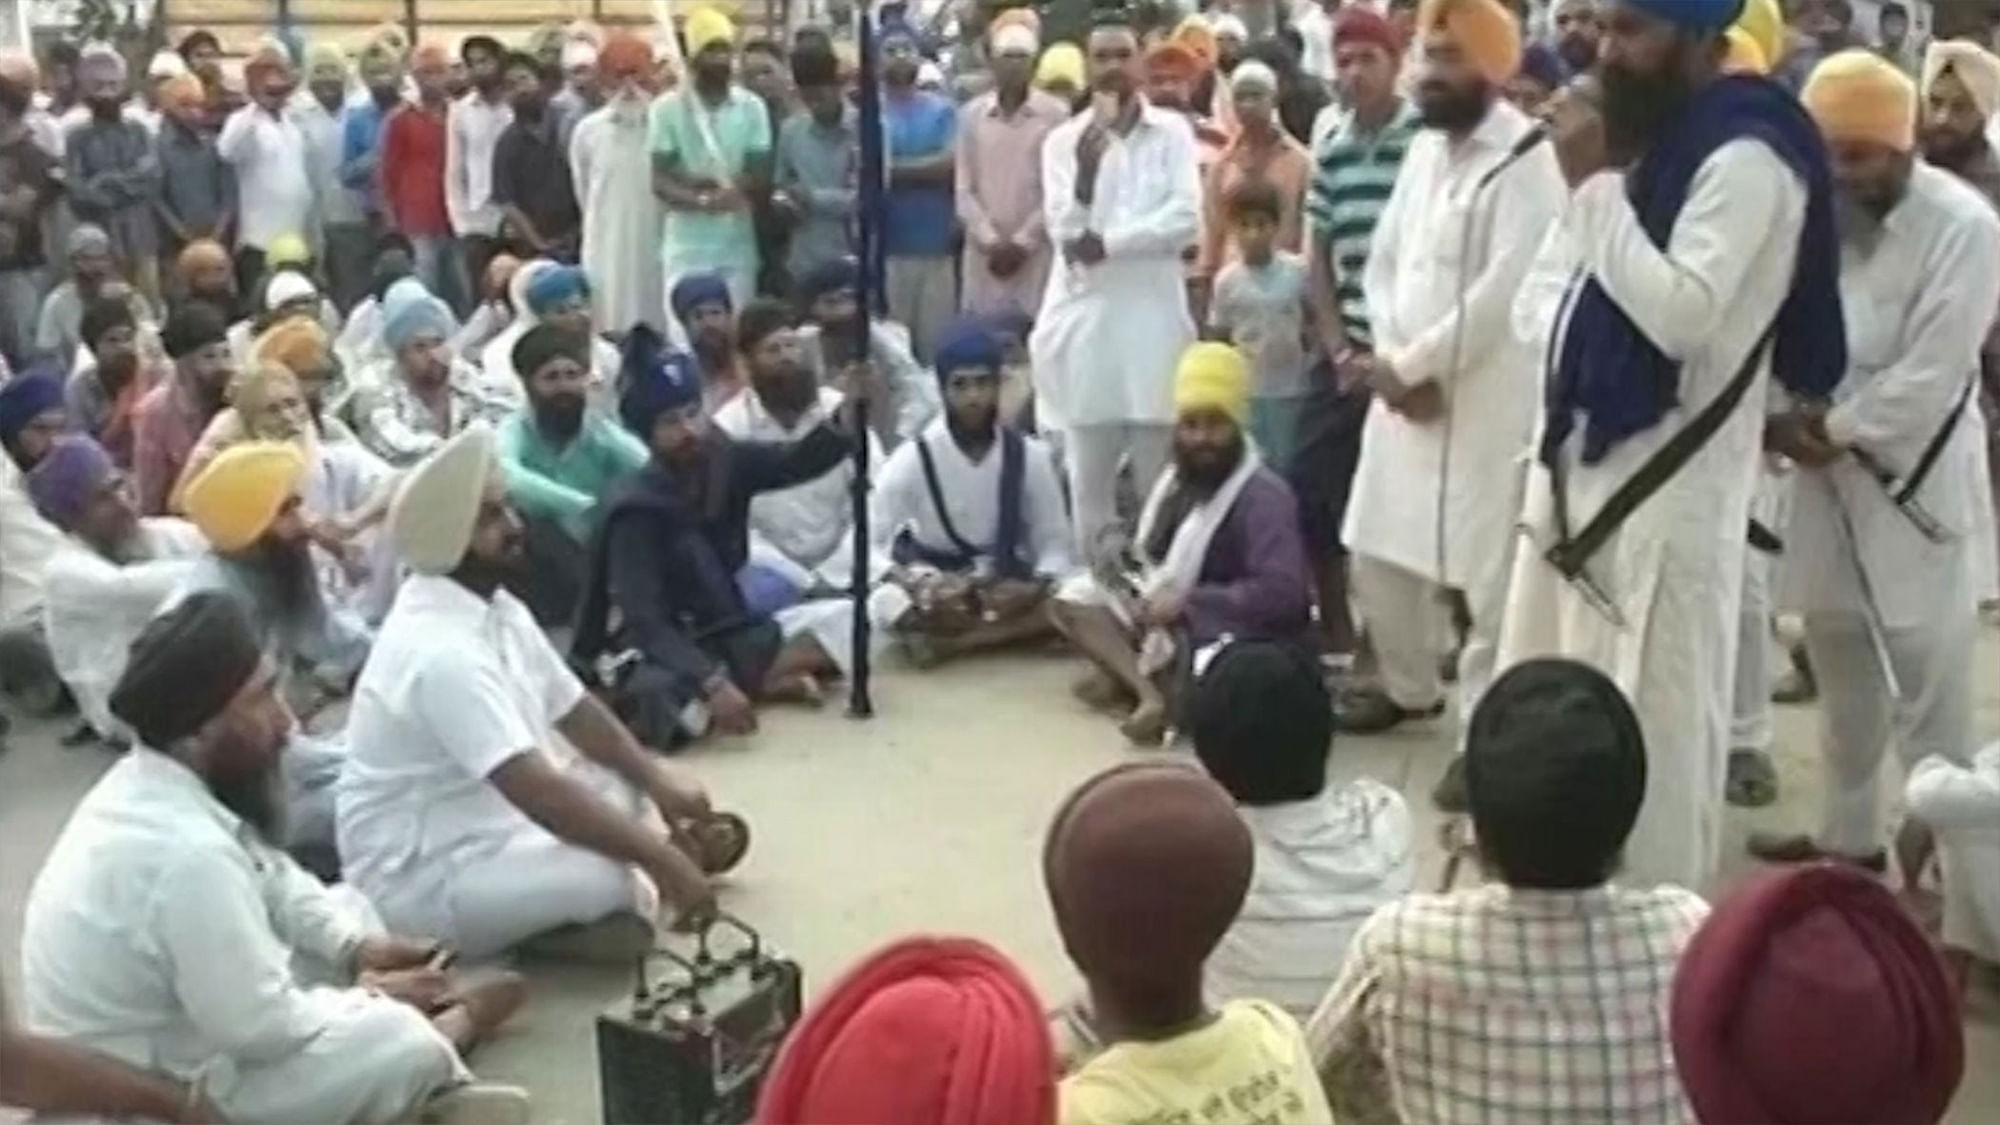 Sikh groups staged protests in Tarn Taran in Punjab after miscreants desecrated the Guru Granth Sahib on Friday. (Photo: ANI screengrab)